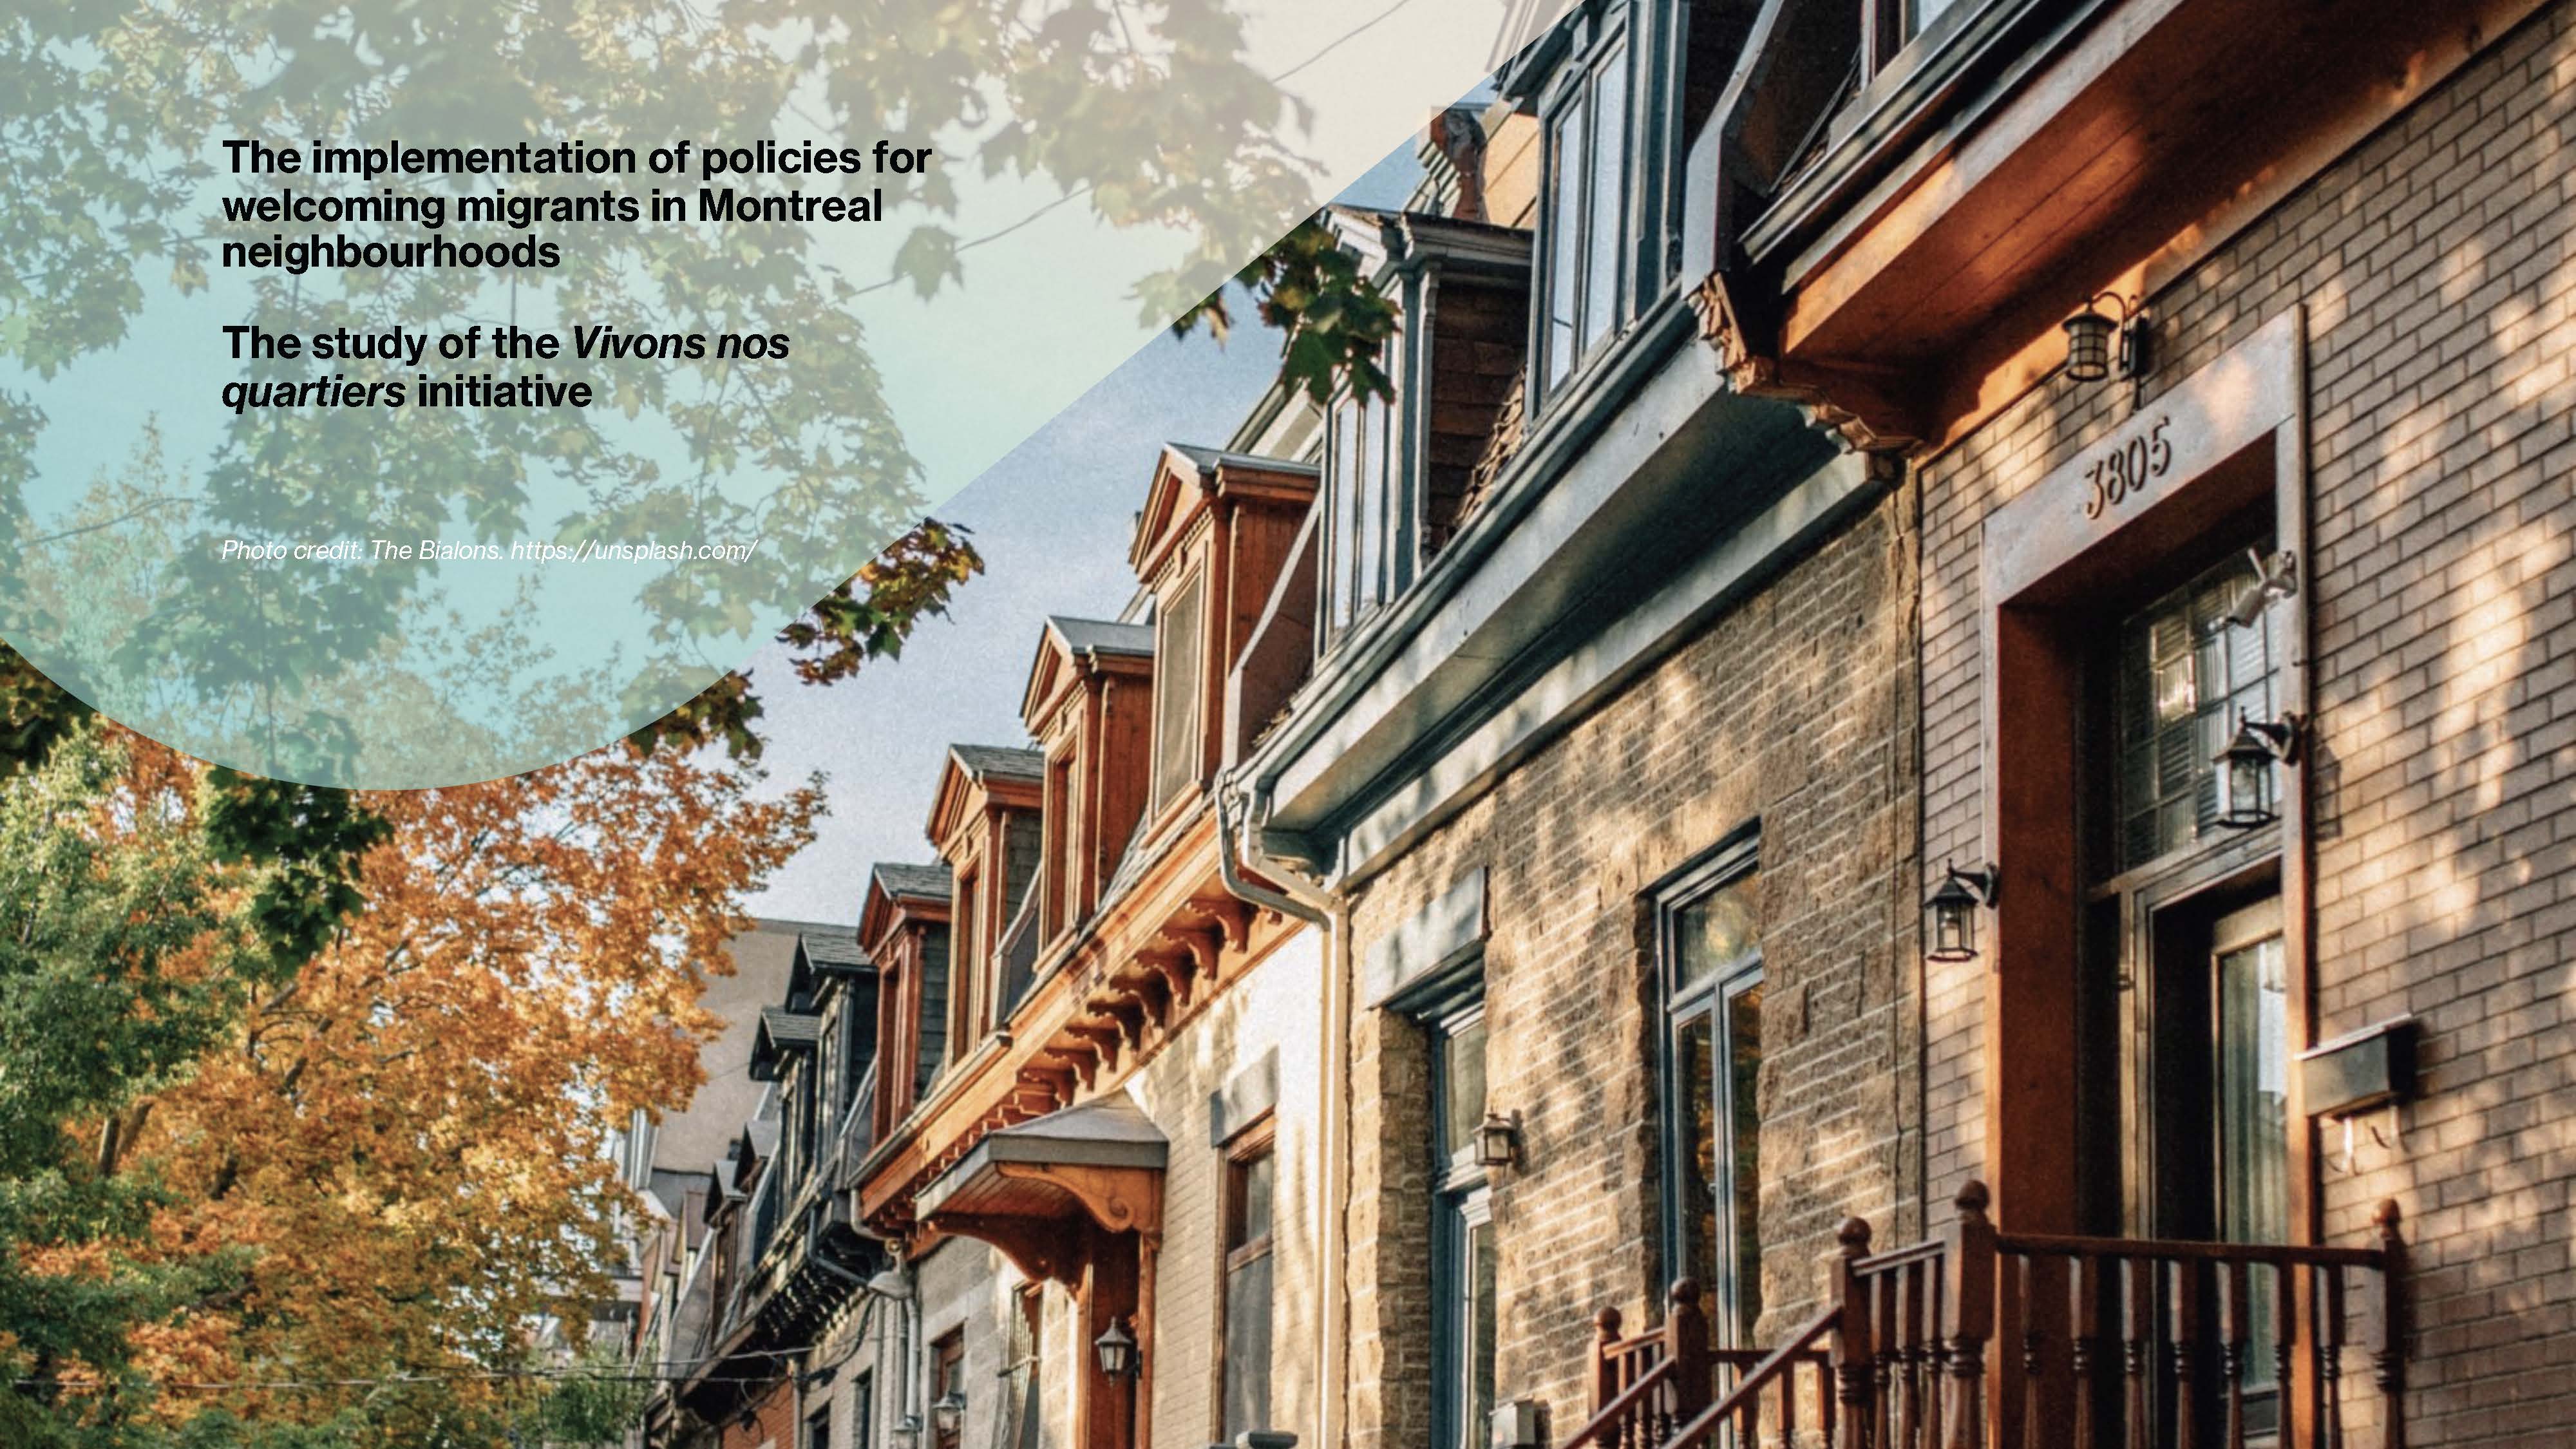 The implementation of policies for welcoming migrants in Montreal neighbourhoods: the study of the Vivons nos quartiers initiative